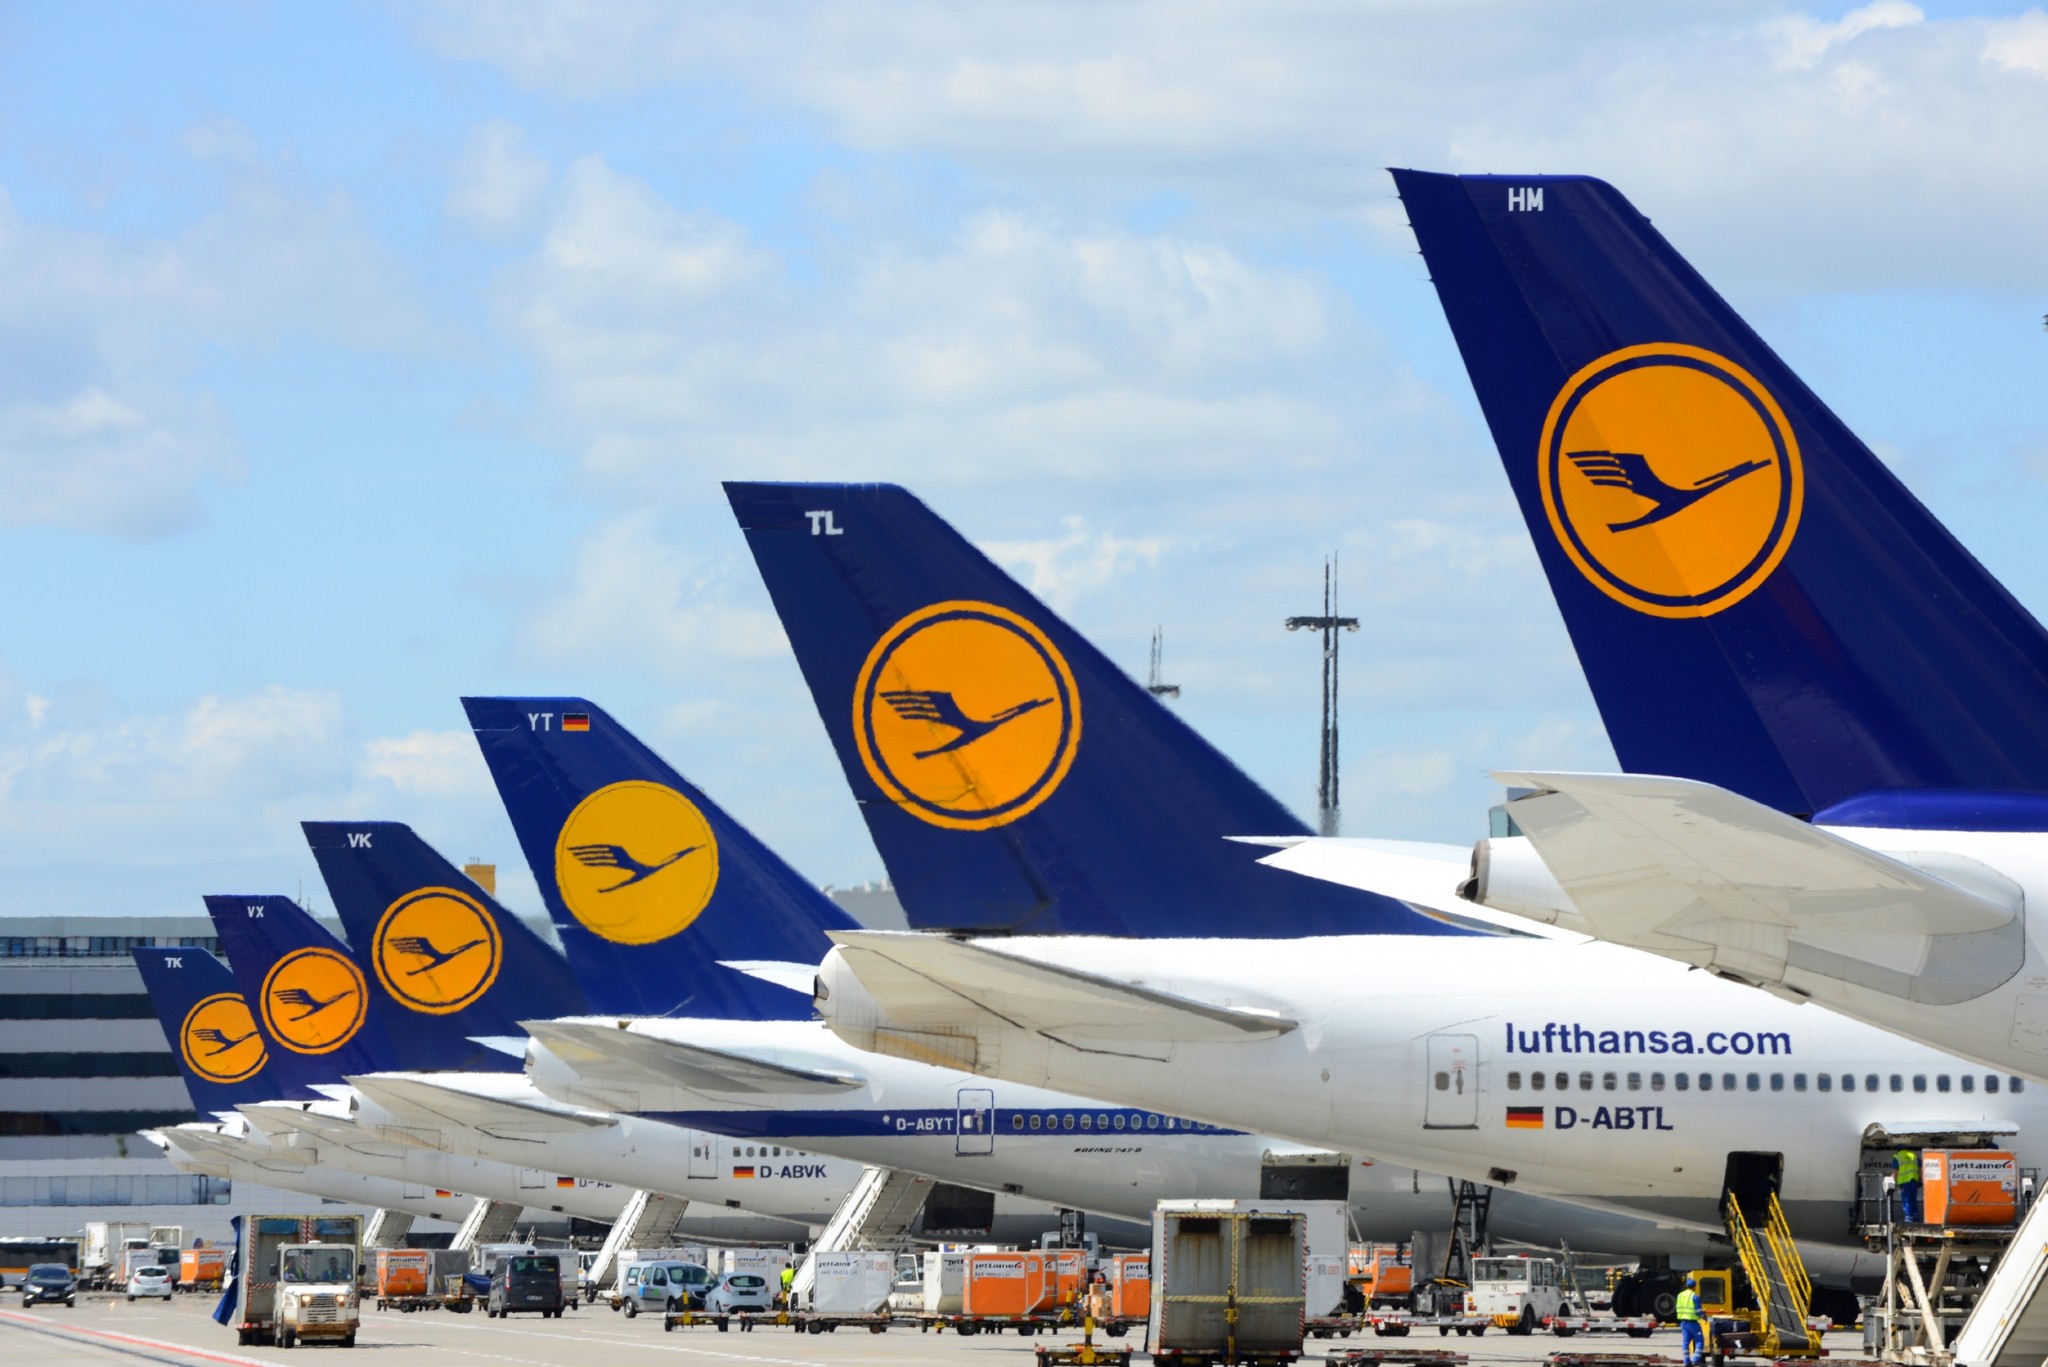 Lufthansa Group set to offer extra routes in summer 2020